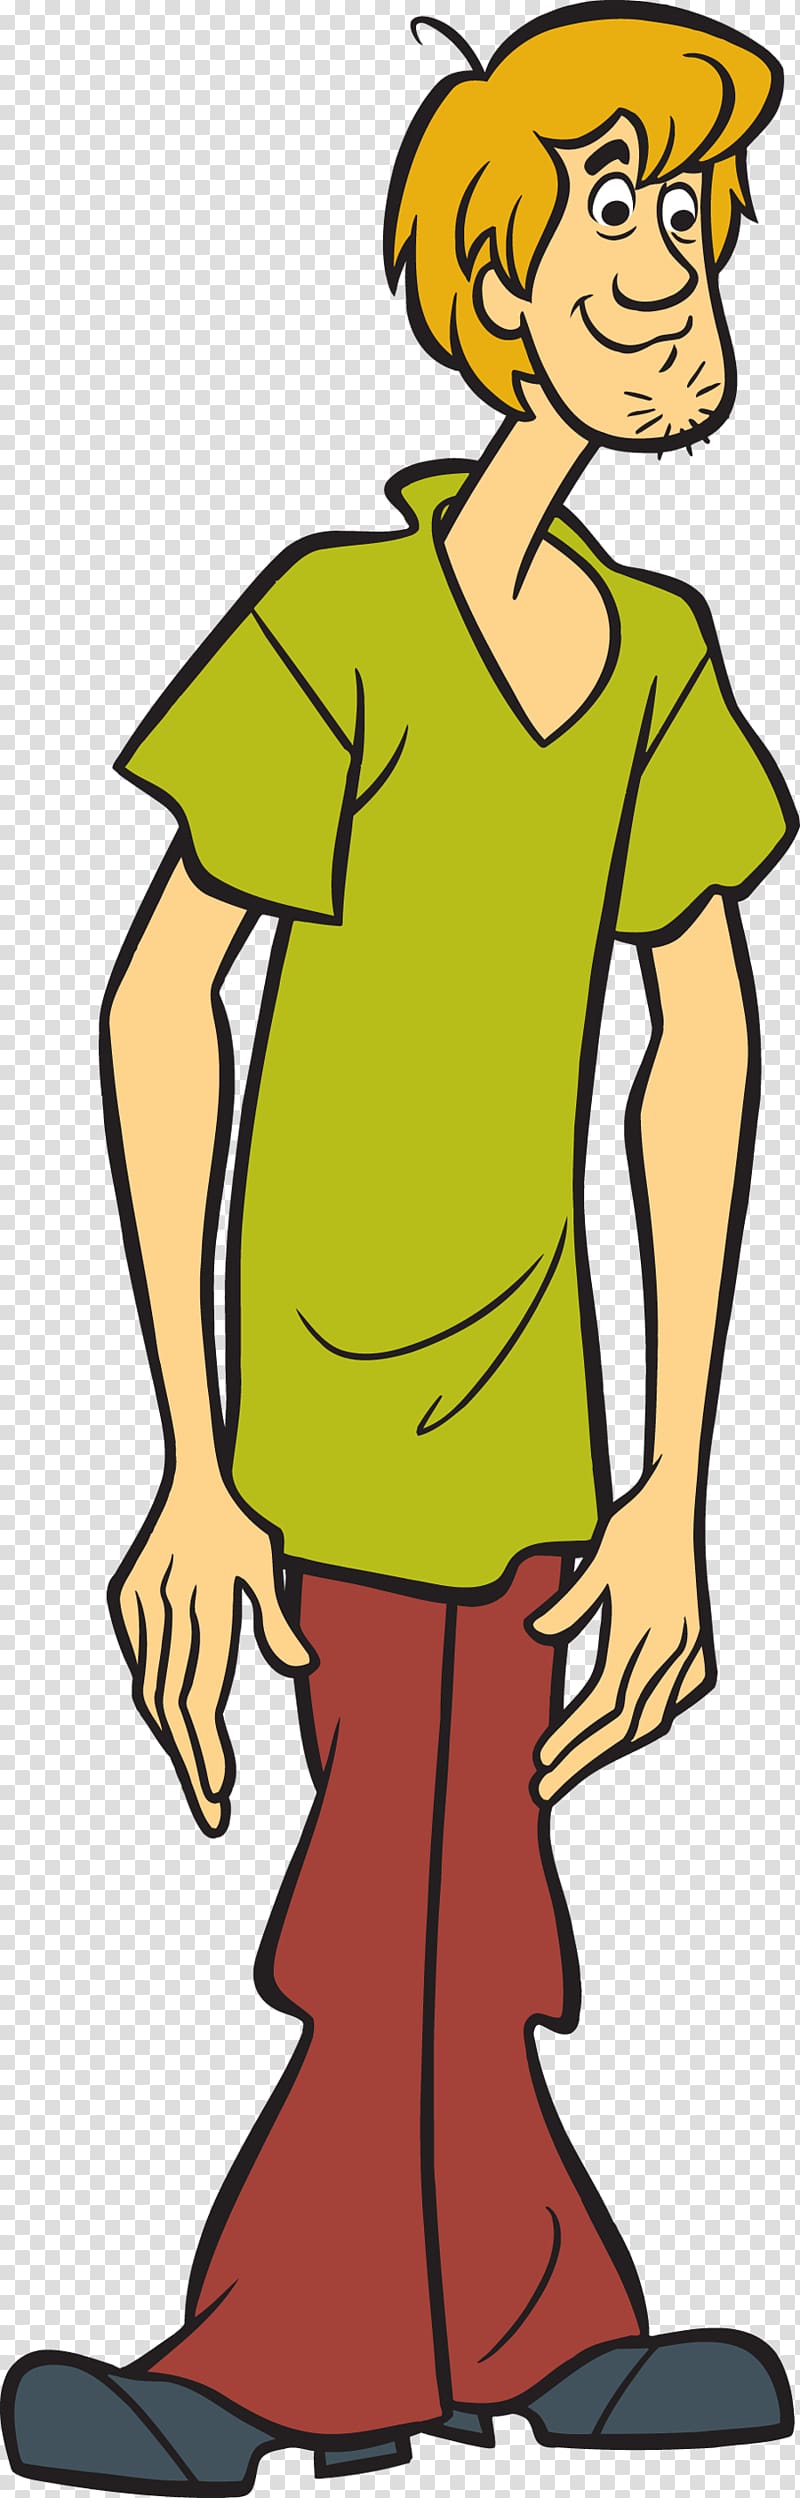 Scooby-Doo Shaggy illustration, Shaggy Rogers Velma Dinkley Daphne Blake Fred Jones Scooby Doo, mr. bean transparent background PNG clipart